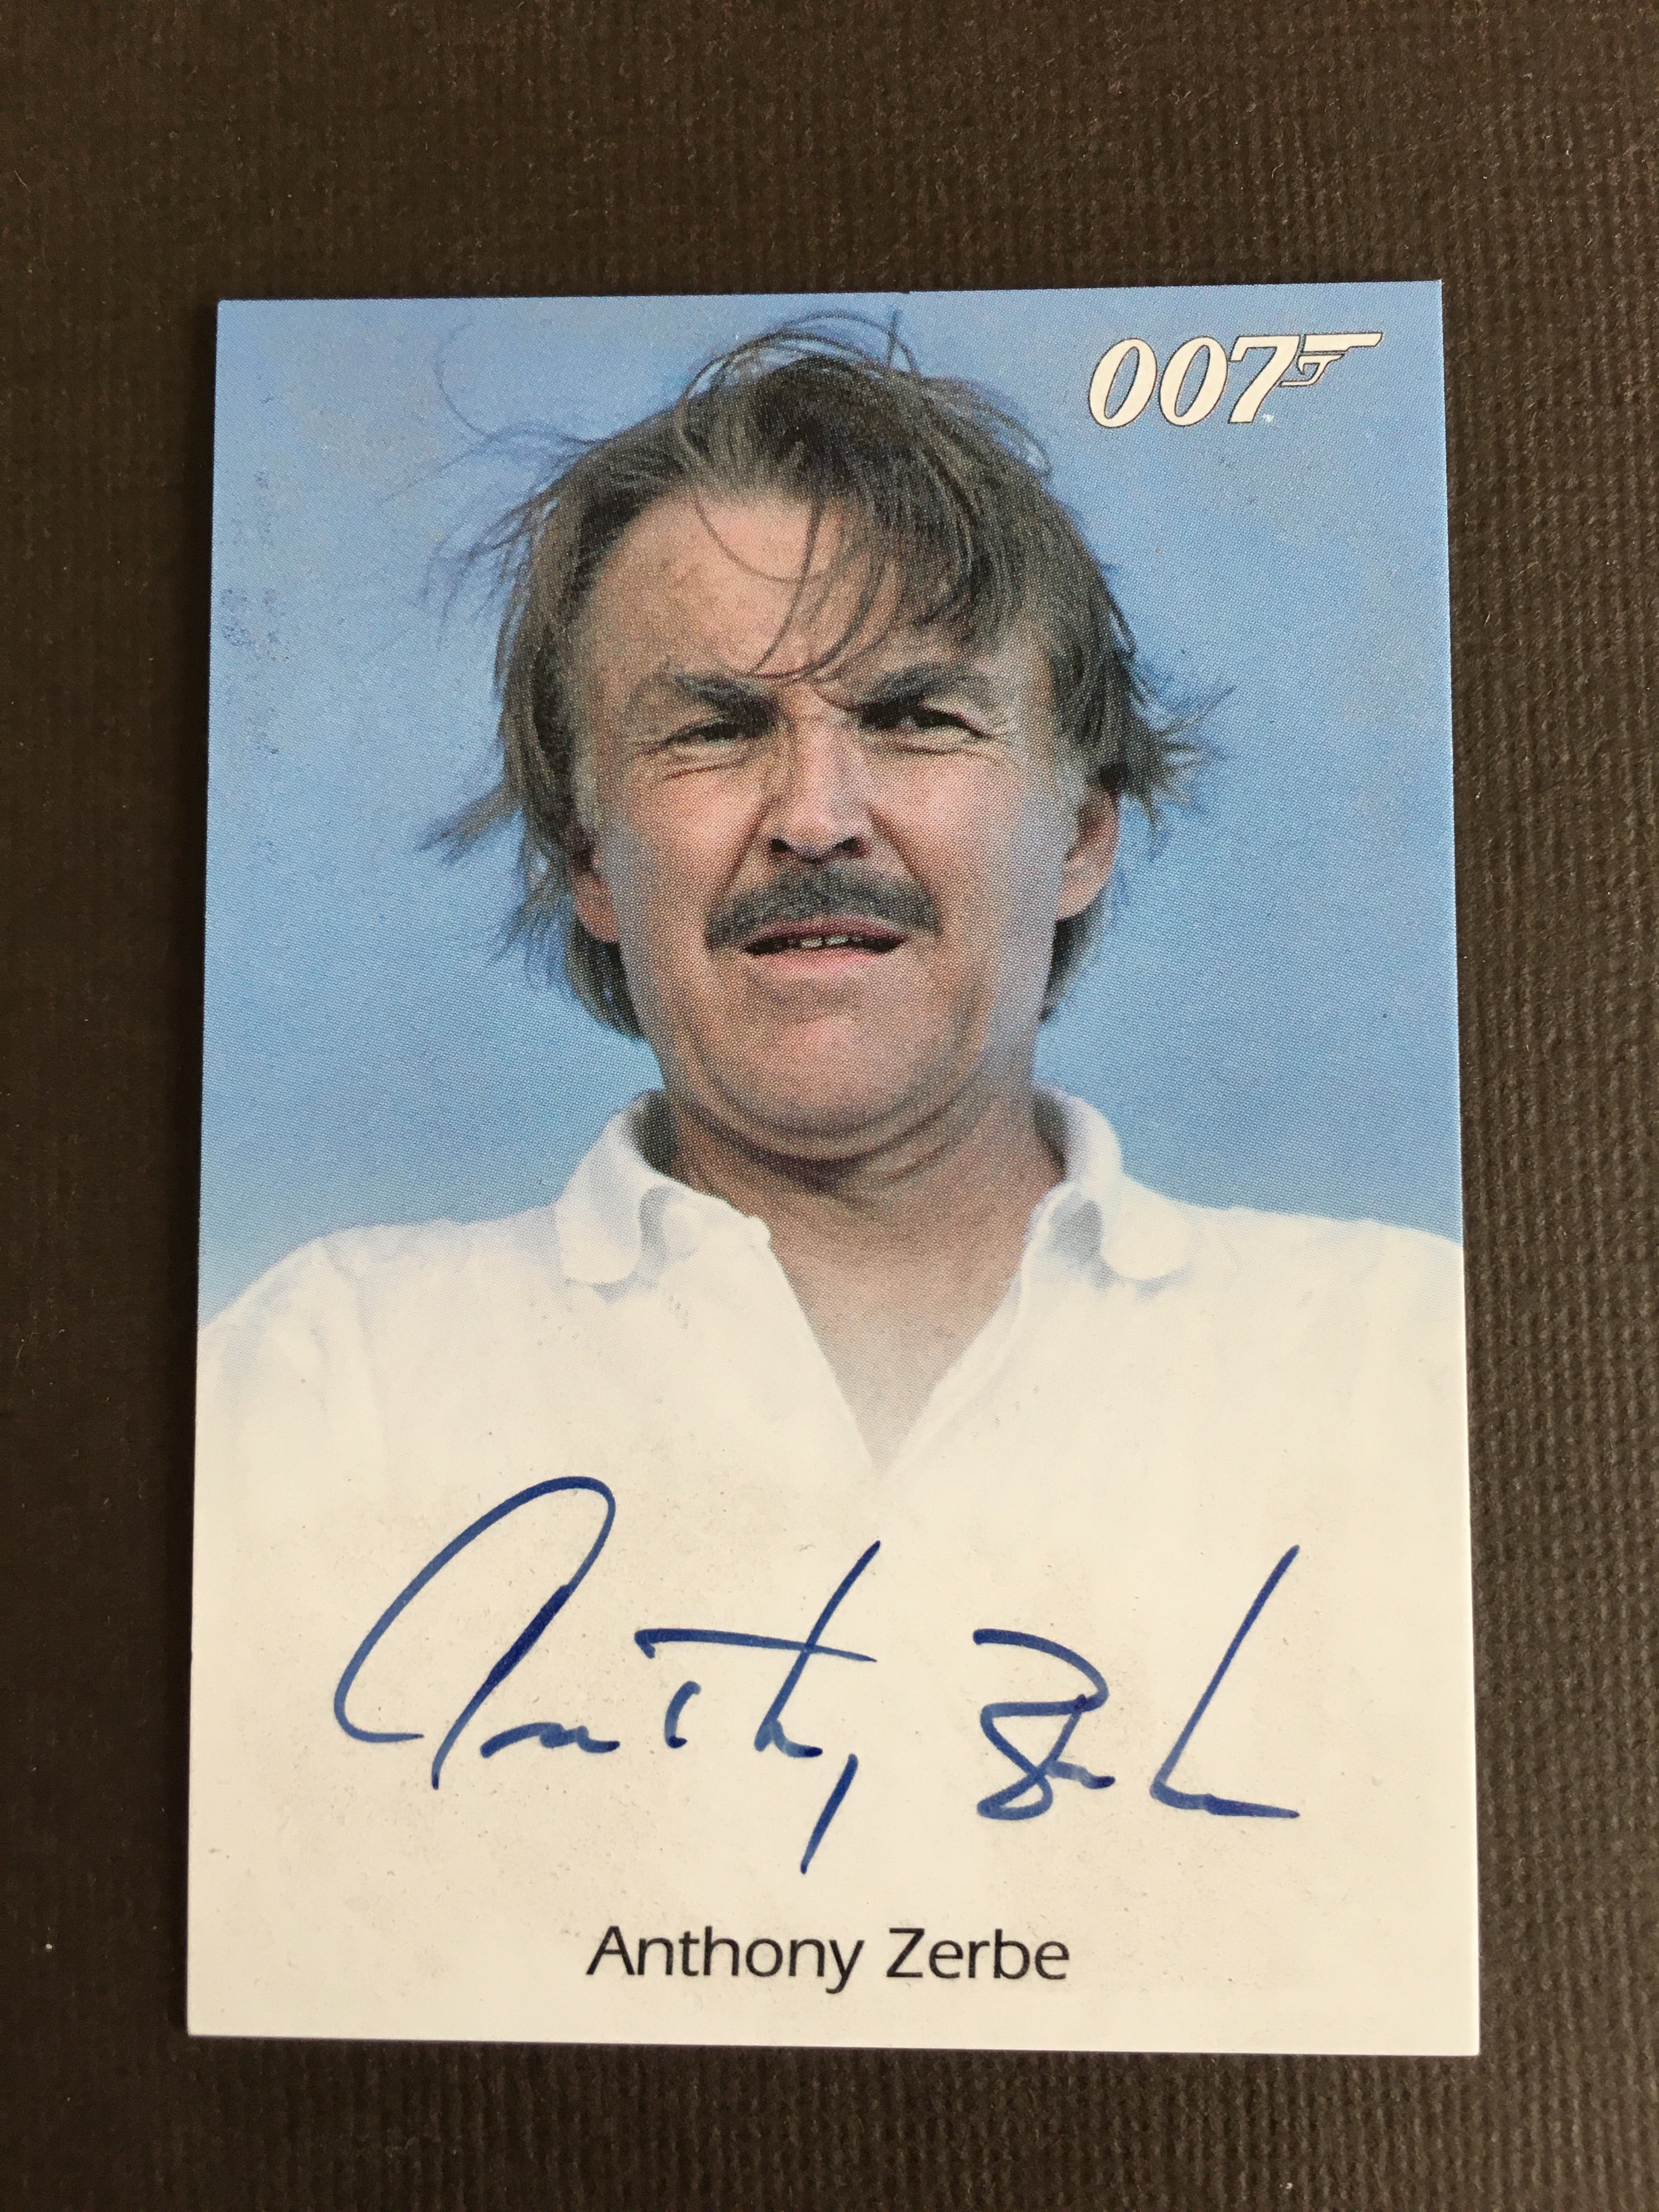 James Bond Autograph Card (Anthony Zerbe) - Limited & Rare Trading Card